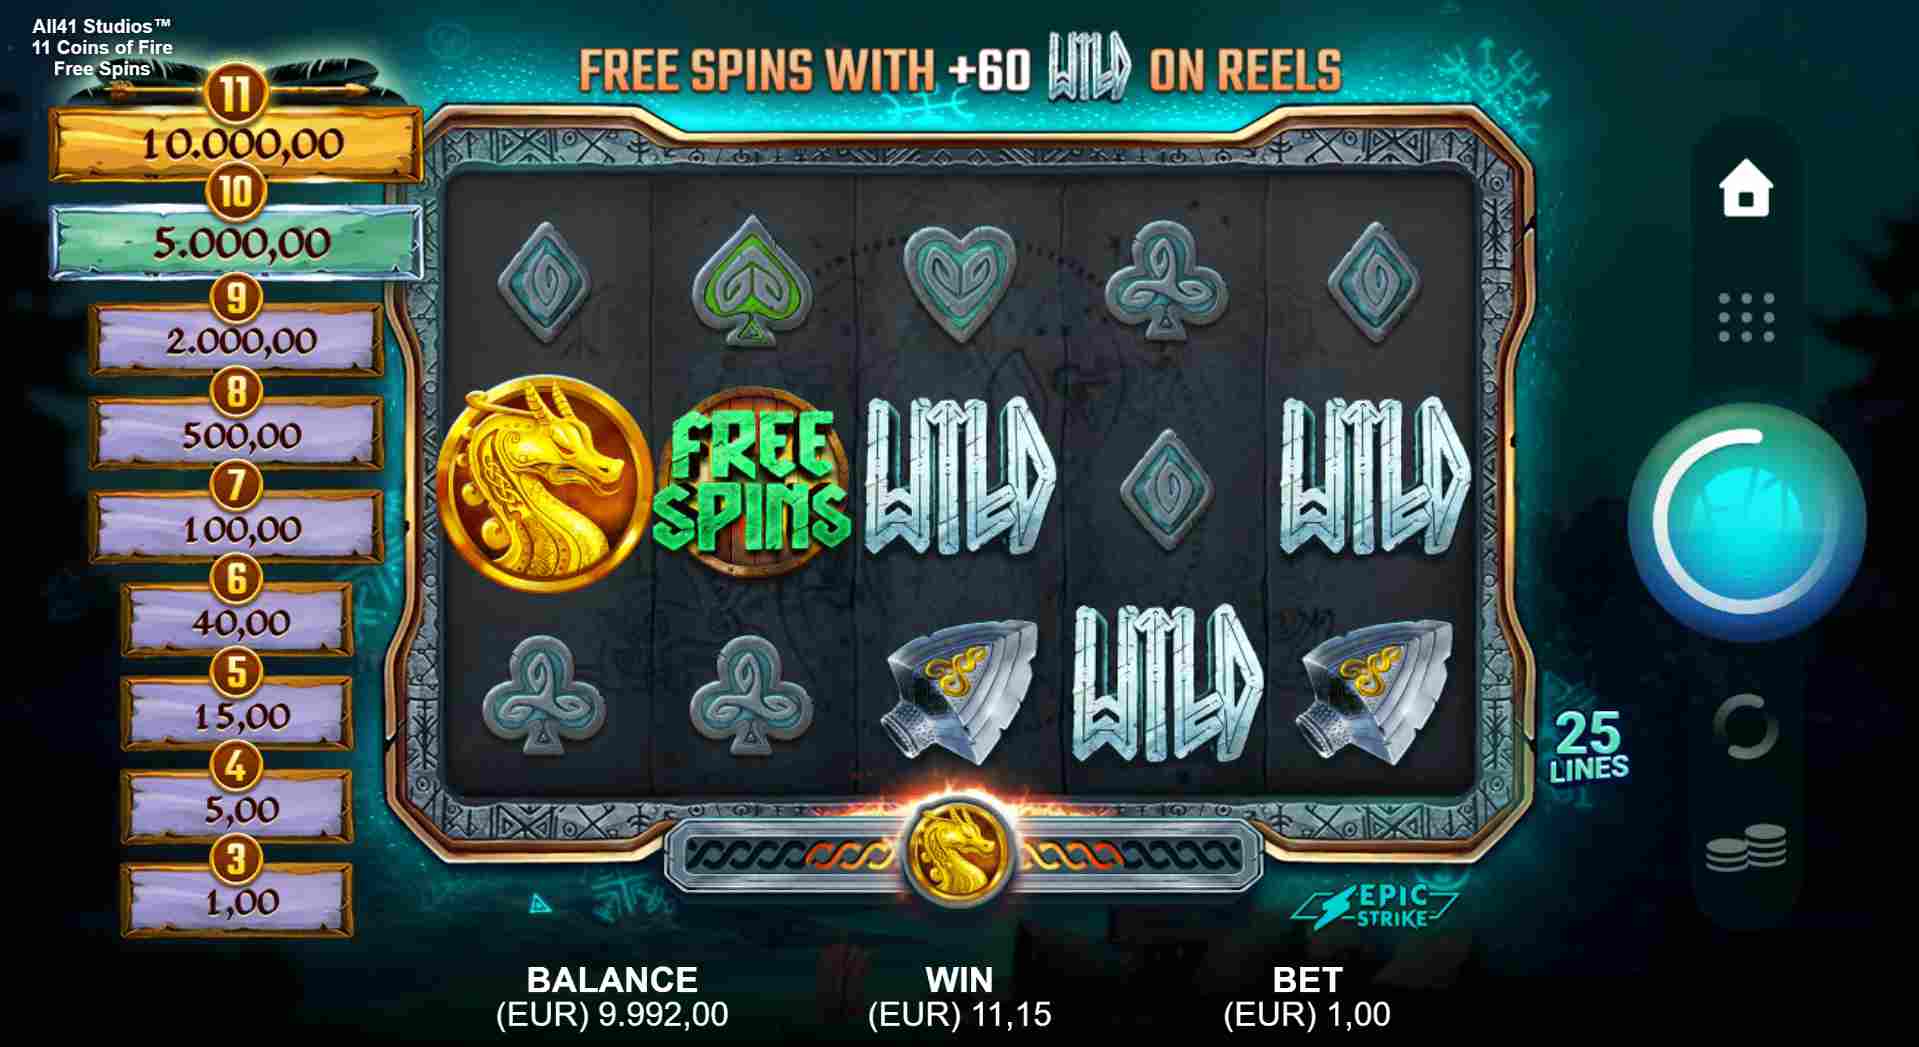 11 Coins of Fire Free Spins